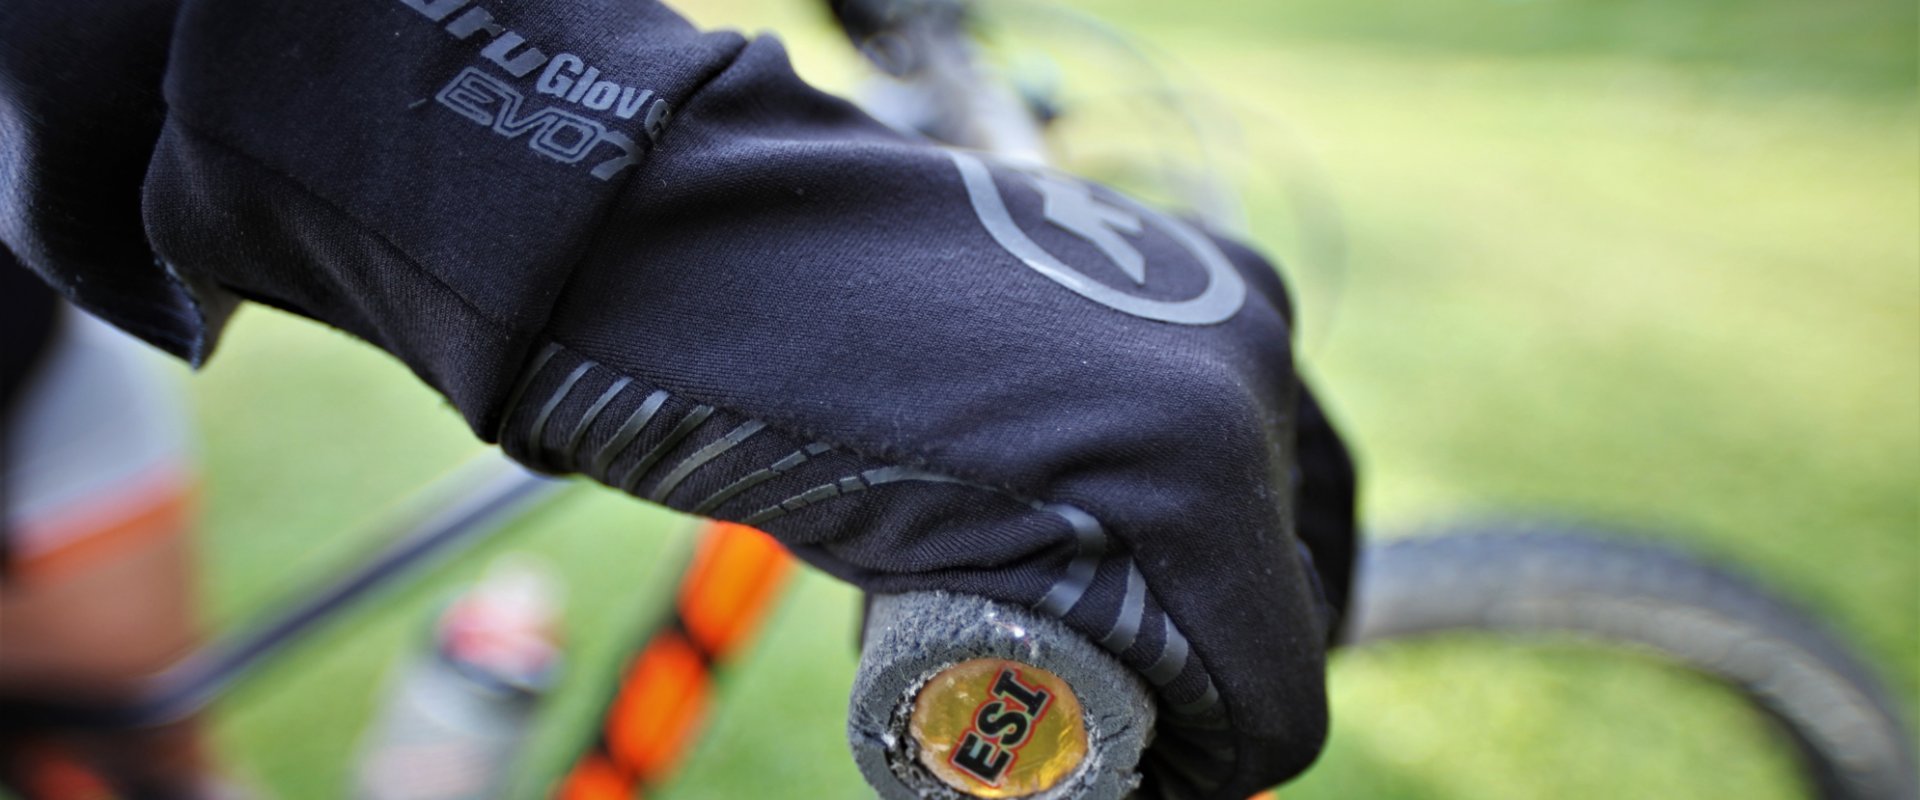 The ASSOS tiburuGloves_evo7 is well thought out.